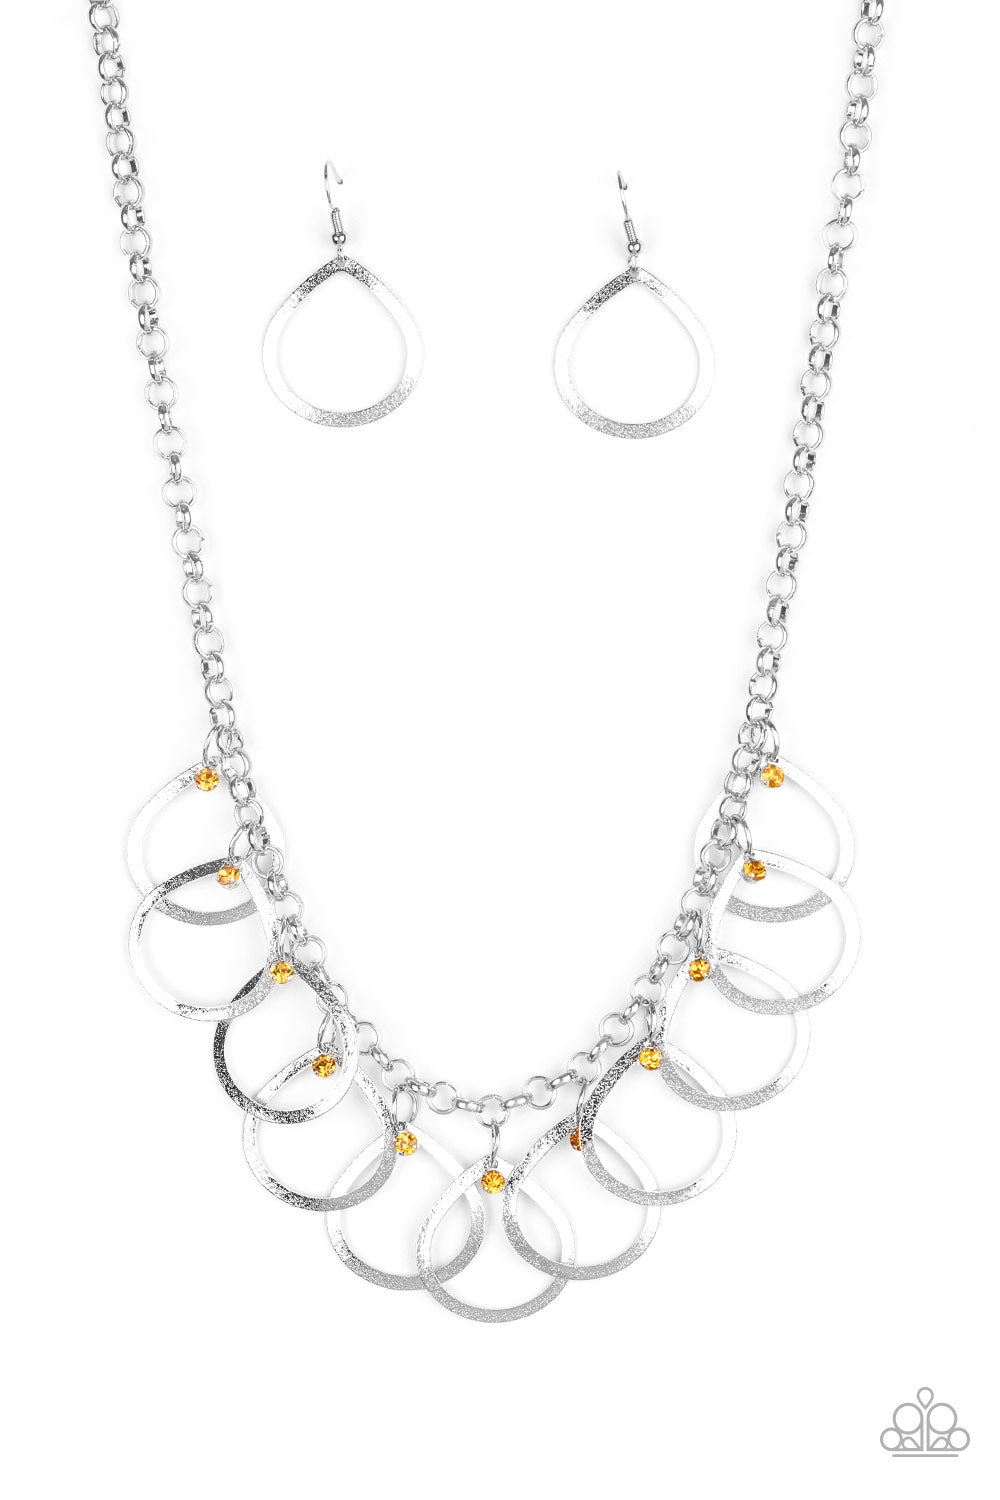 Delicately hammered in a shimmery finish, shiny silver teardrops dangle from dainty yellow rhinestone embellished links, creating a refined fringe below the collar. Features an adjustable clasp closure.